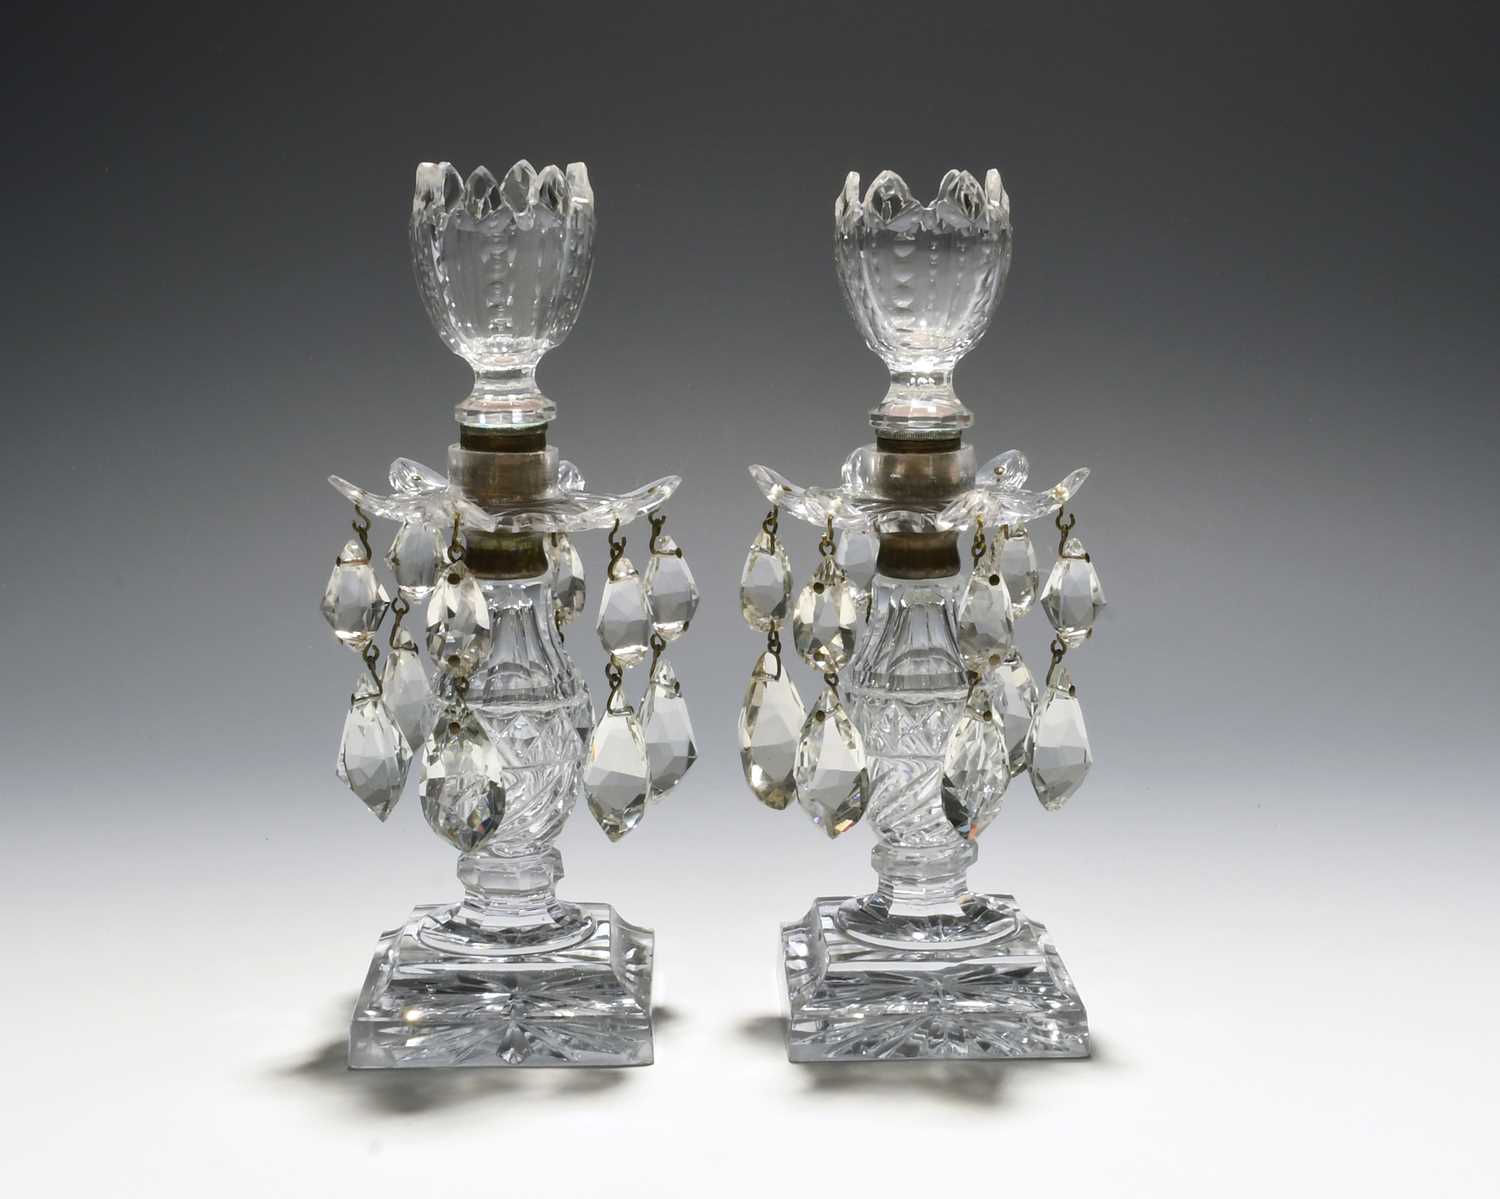 A small pair of cut glass lustre candlesticks, early 19th century, the six-petalled drip pans hung